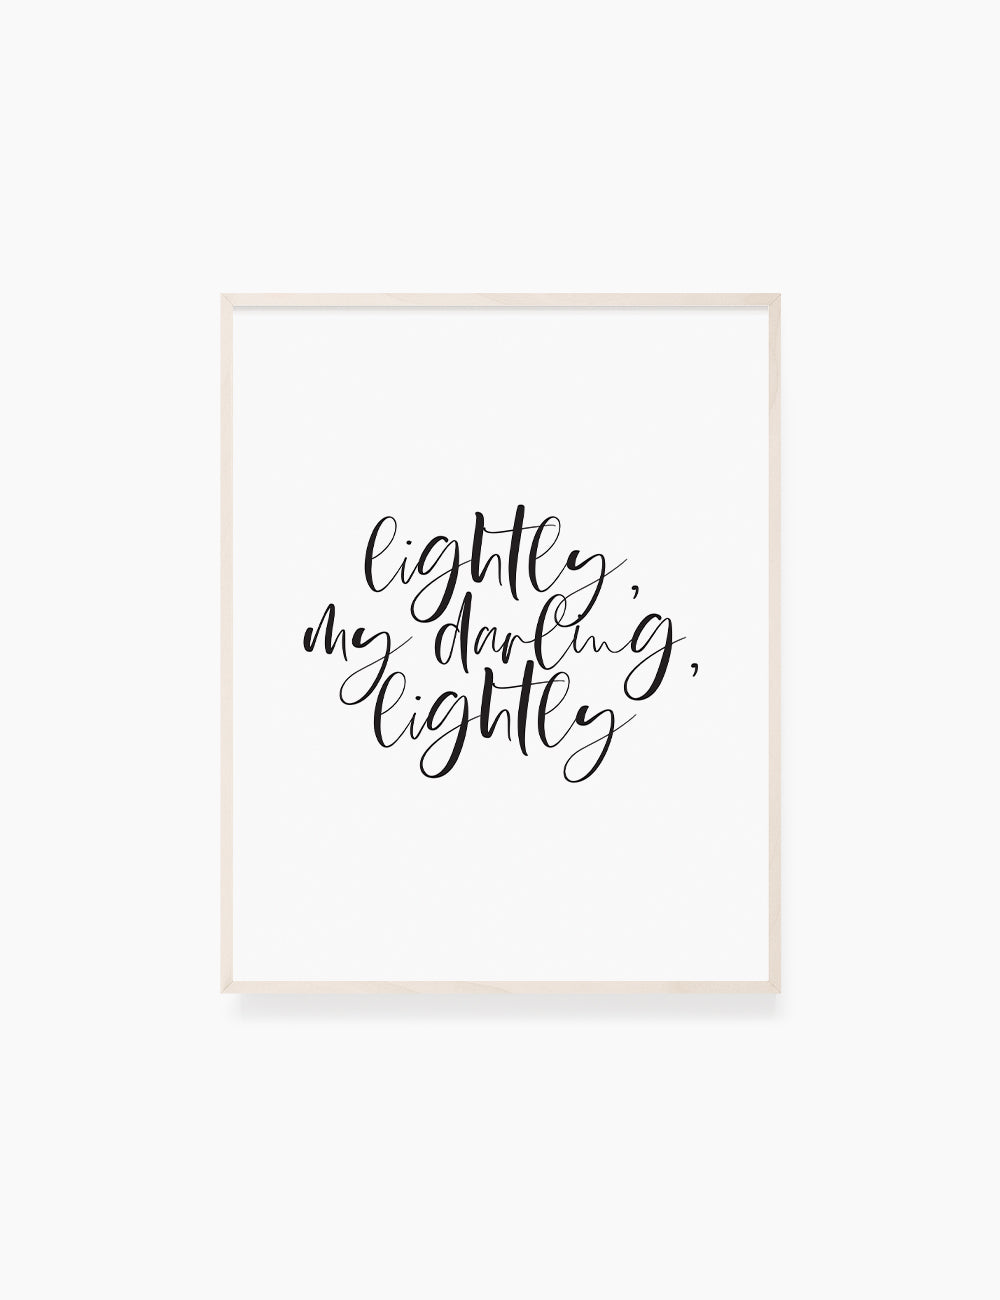 Printable Wall Art Quote: LIGHTLY, MY DARLING, LIGHTLY. Printable Poster. Inspirational Quote. WA043 - Paper Moon Art & Design